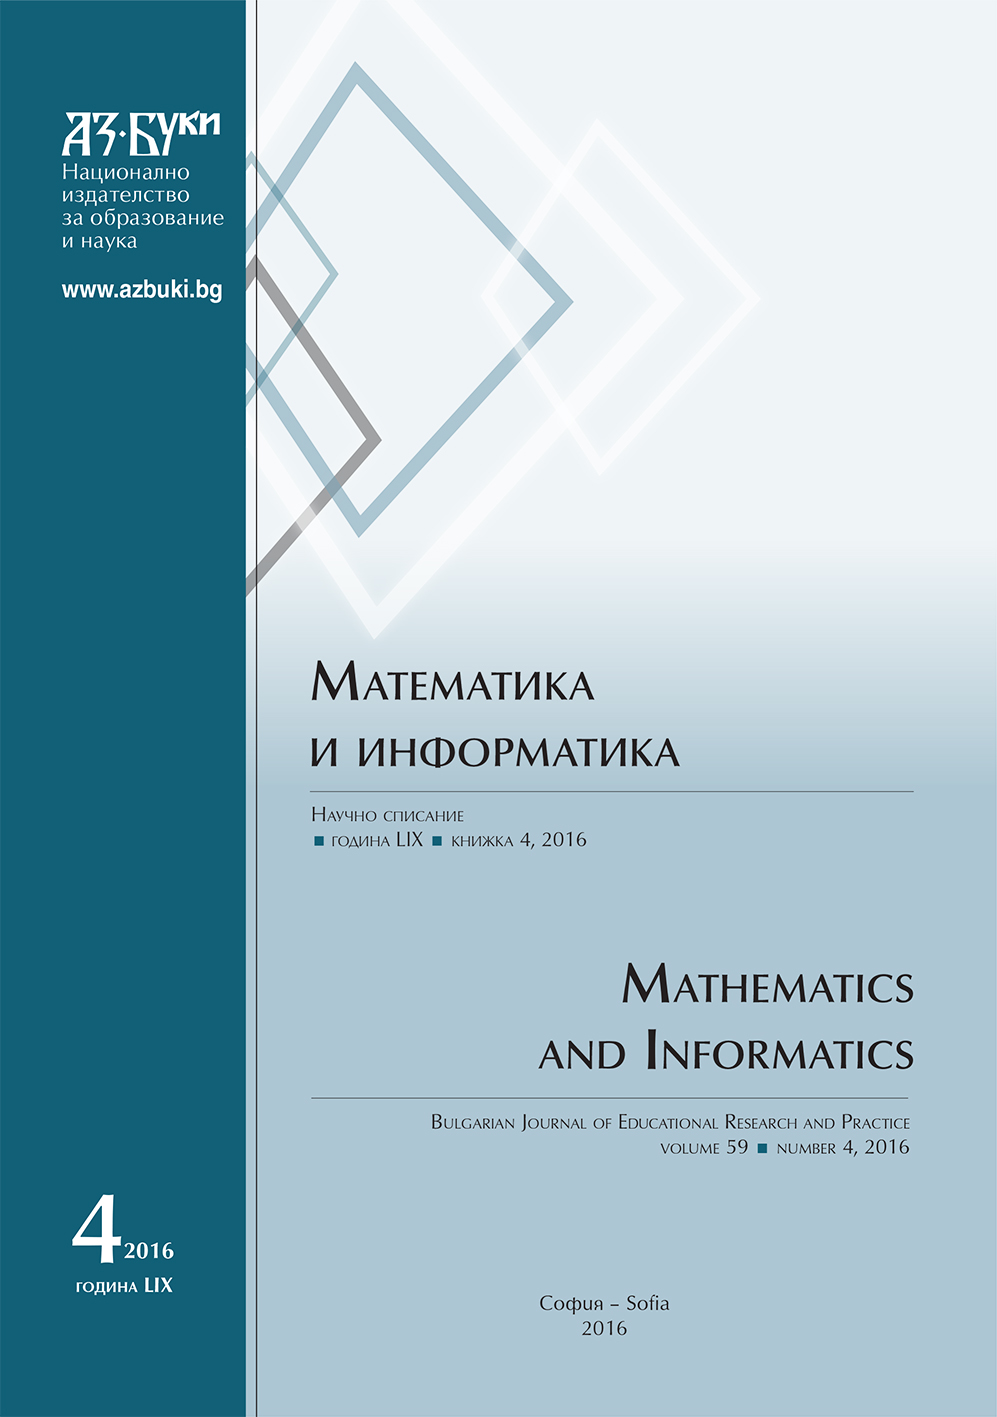 Comparative Analysis of the Students’ Scores in Solving Constructive Tasks when Geometry is Studied in a Standard Way and with the Use of Complex Numbers